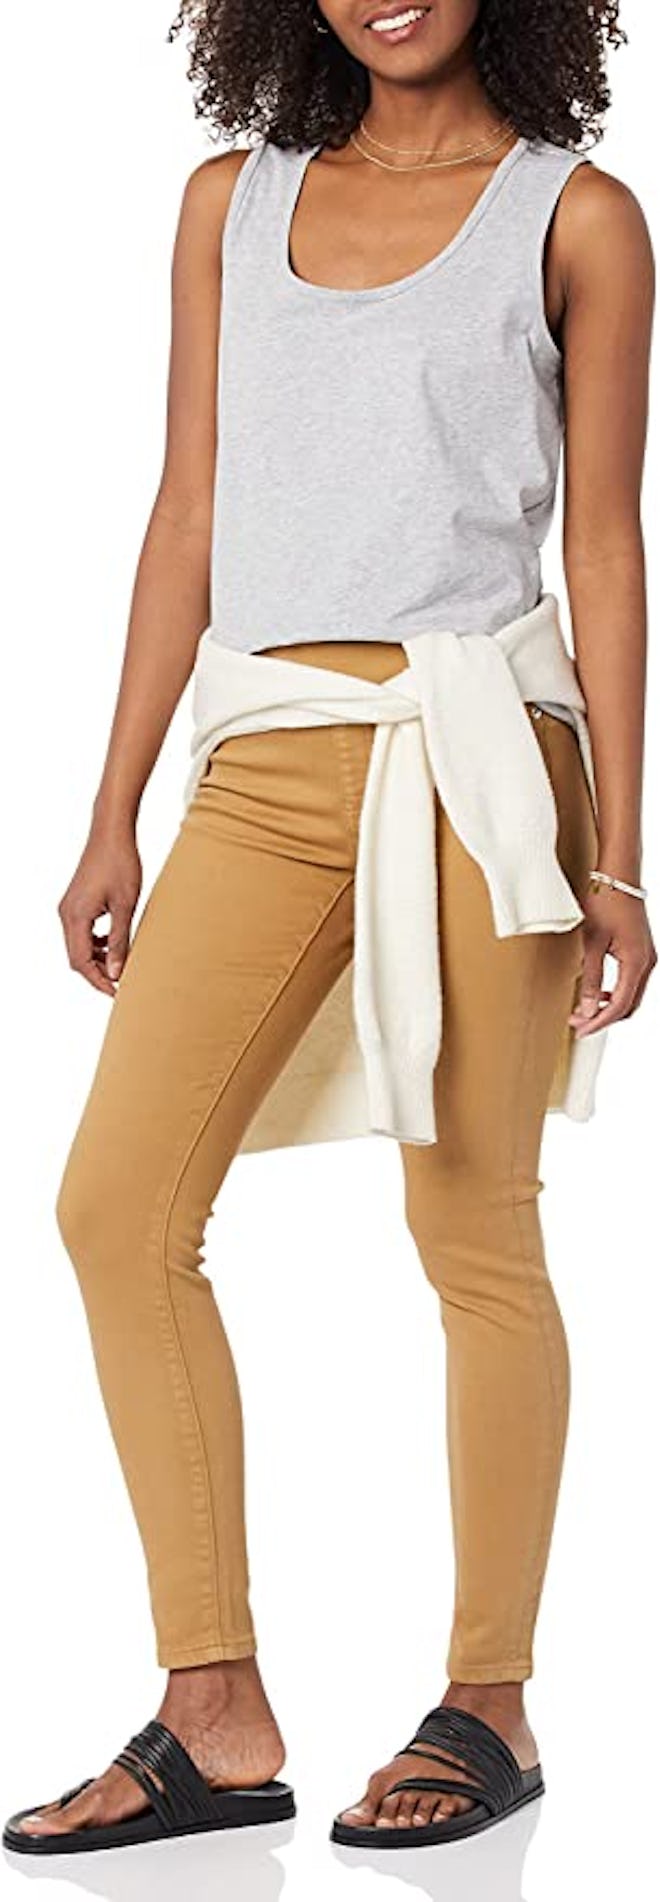 Amazon Essentials Stretch Pull-On Jegging